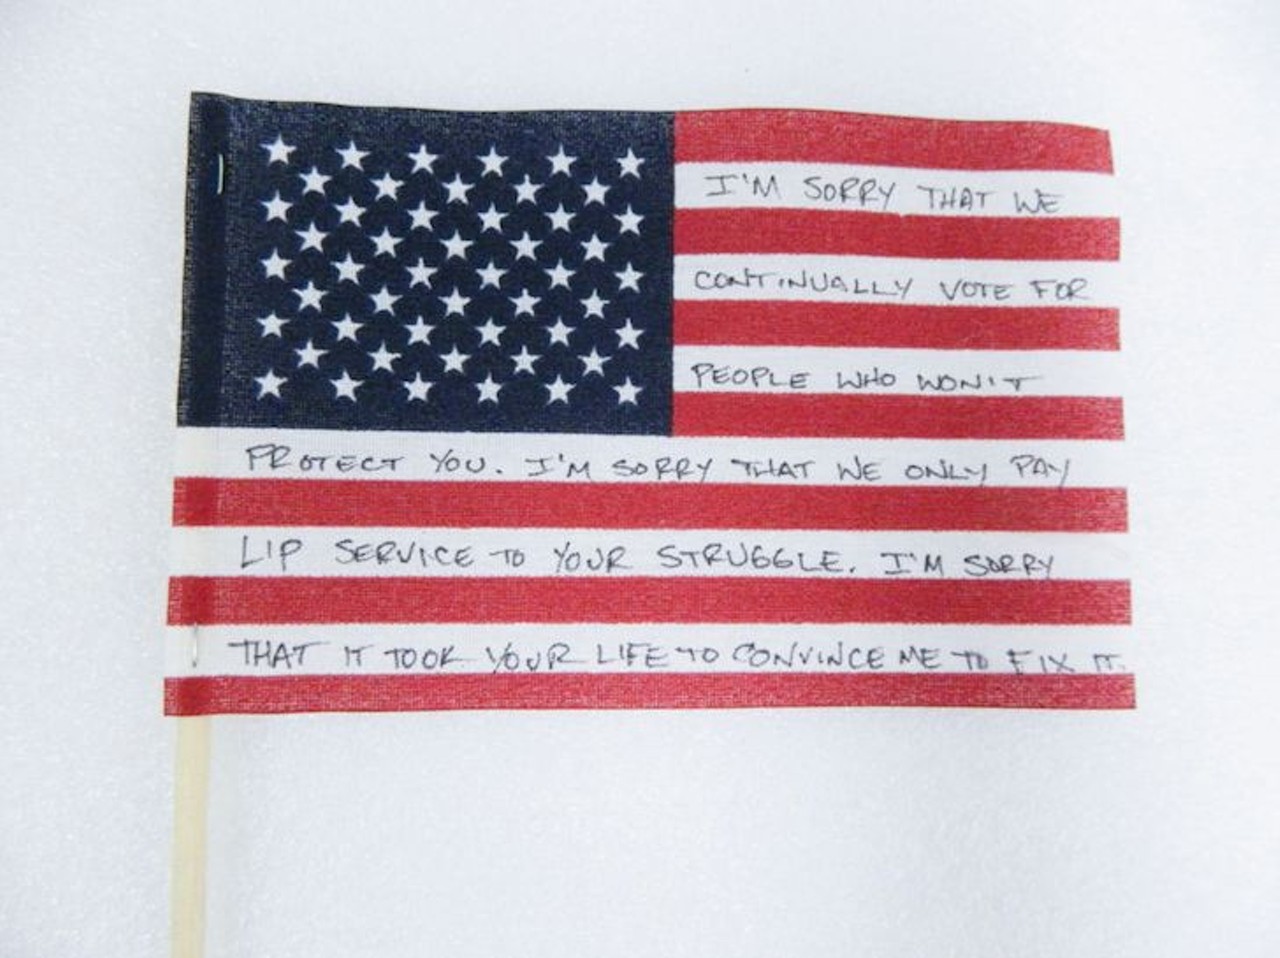 American Flag 
Description: 
Small American flag on a wooden stick with a message written on the white stripes in black that says, &#147;I&#146;M SORRY THAT WE CONTINUALLY VOTE FOR PEOPLE WHO WON&#146;T PROTECT YOU. I&#146;M SORRY THAT WE ONLY PAY LIP SERVICE TO YOUR STRUGGLE. I&#146;M SORRY THAT IT TOOK YOUR LIFE TO CONVINCE ME TO FIX IT.&#148;